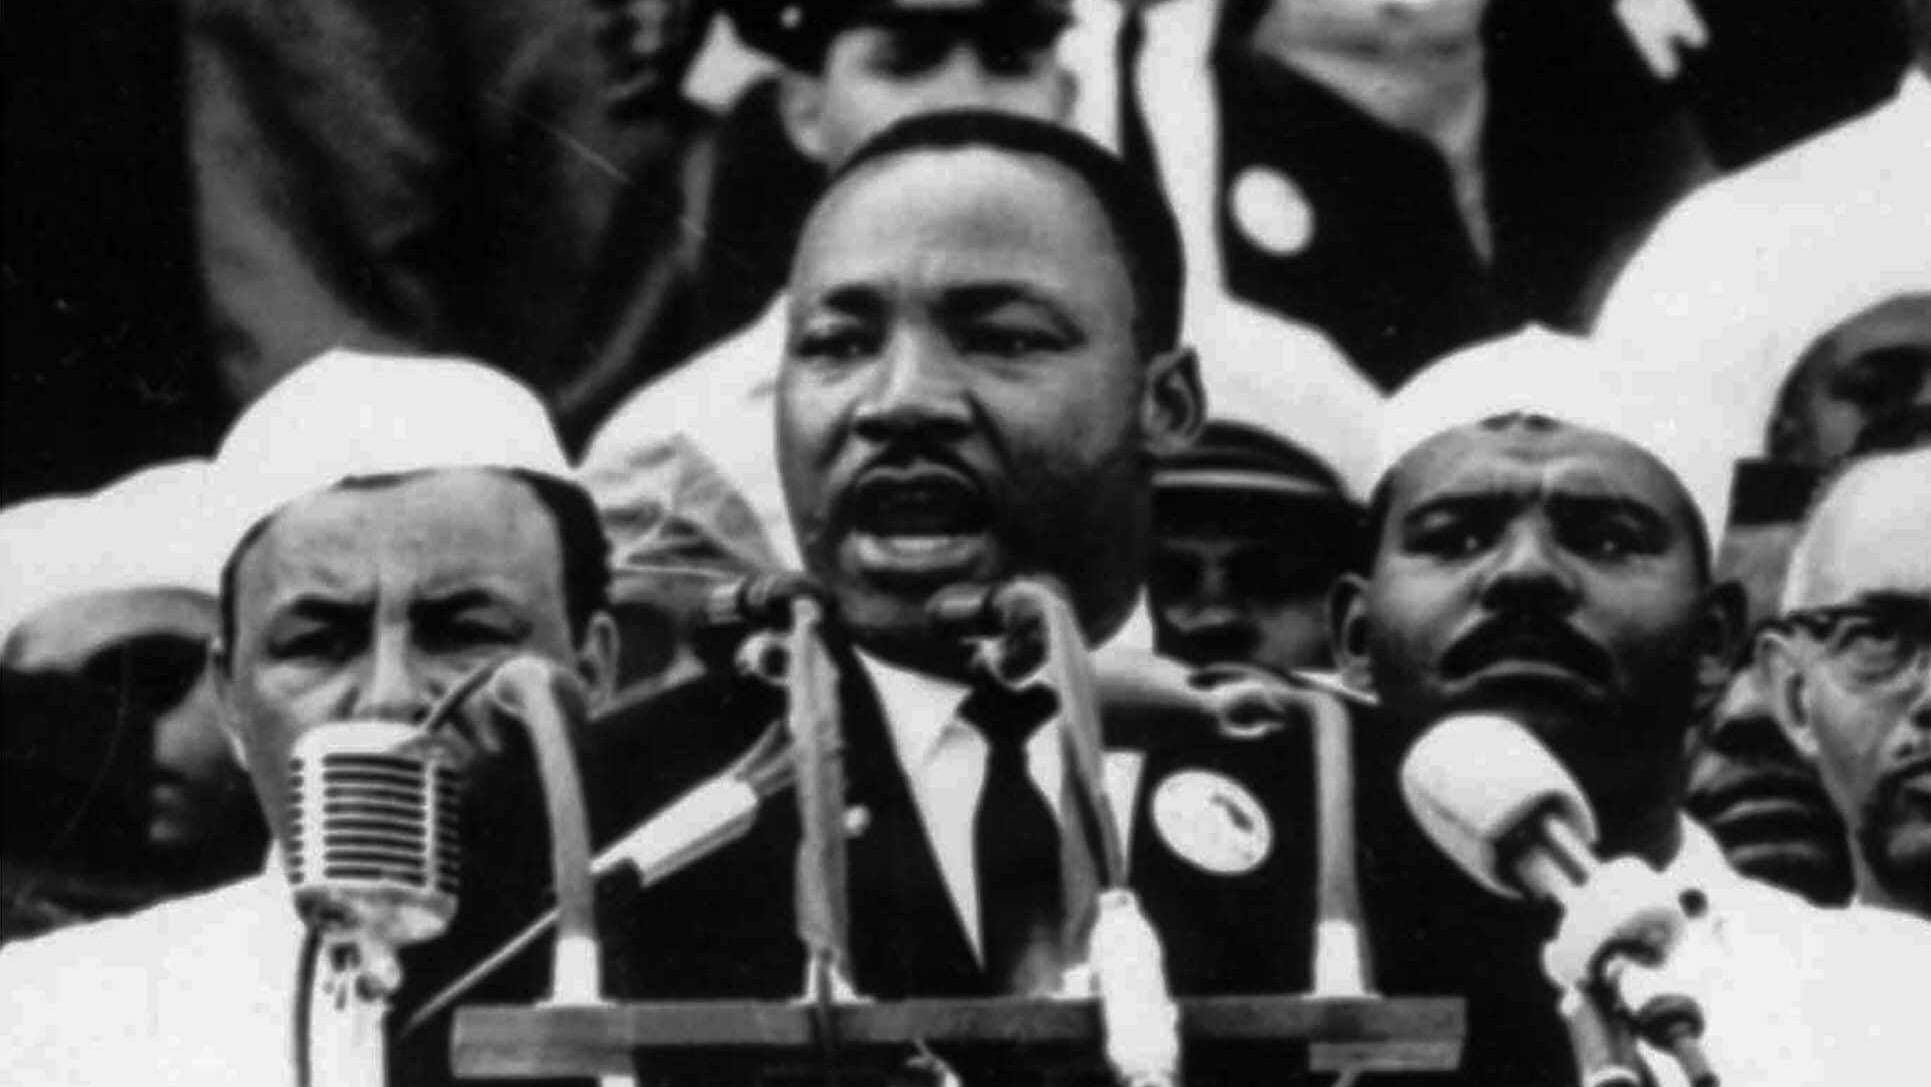 Martin Luther King Jr. Day celebrations in metro Detroit: What's coming up - Detroit Free Press